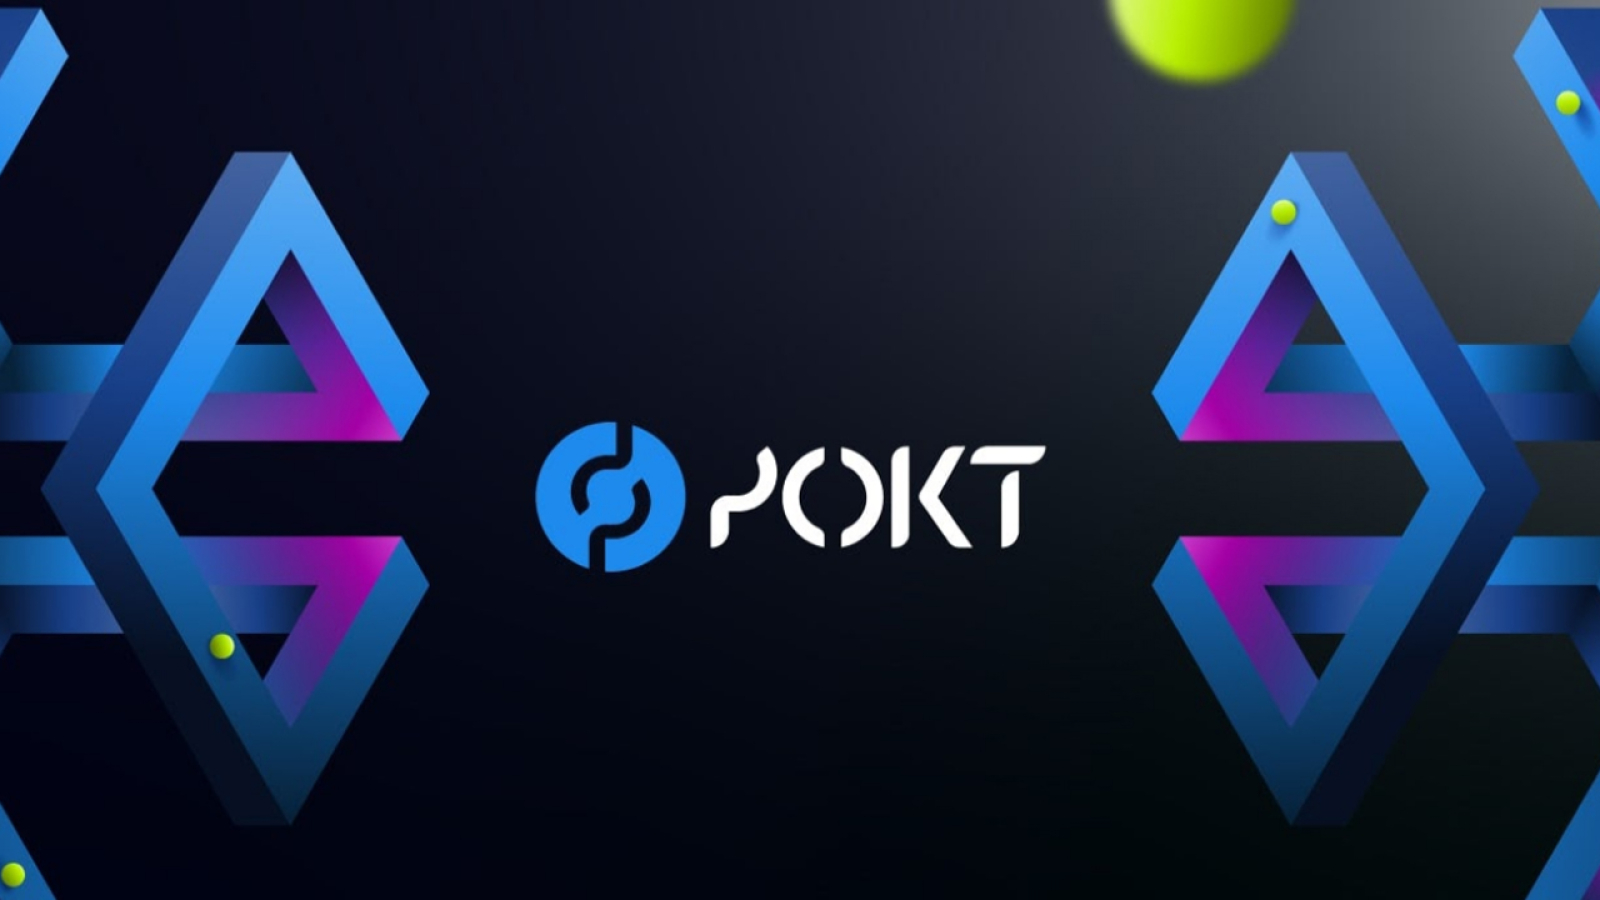 Pocket Network Announces Closing of its Strategic Private Sale Led by Blockchain Industry Leaders Republic Capital, RockTree Capital, Arrington Capital and Others to Accelerate Network Development & Global Expansion